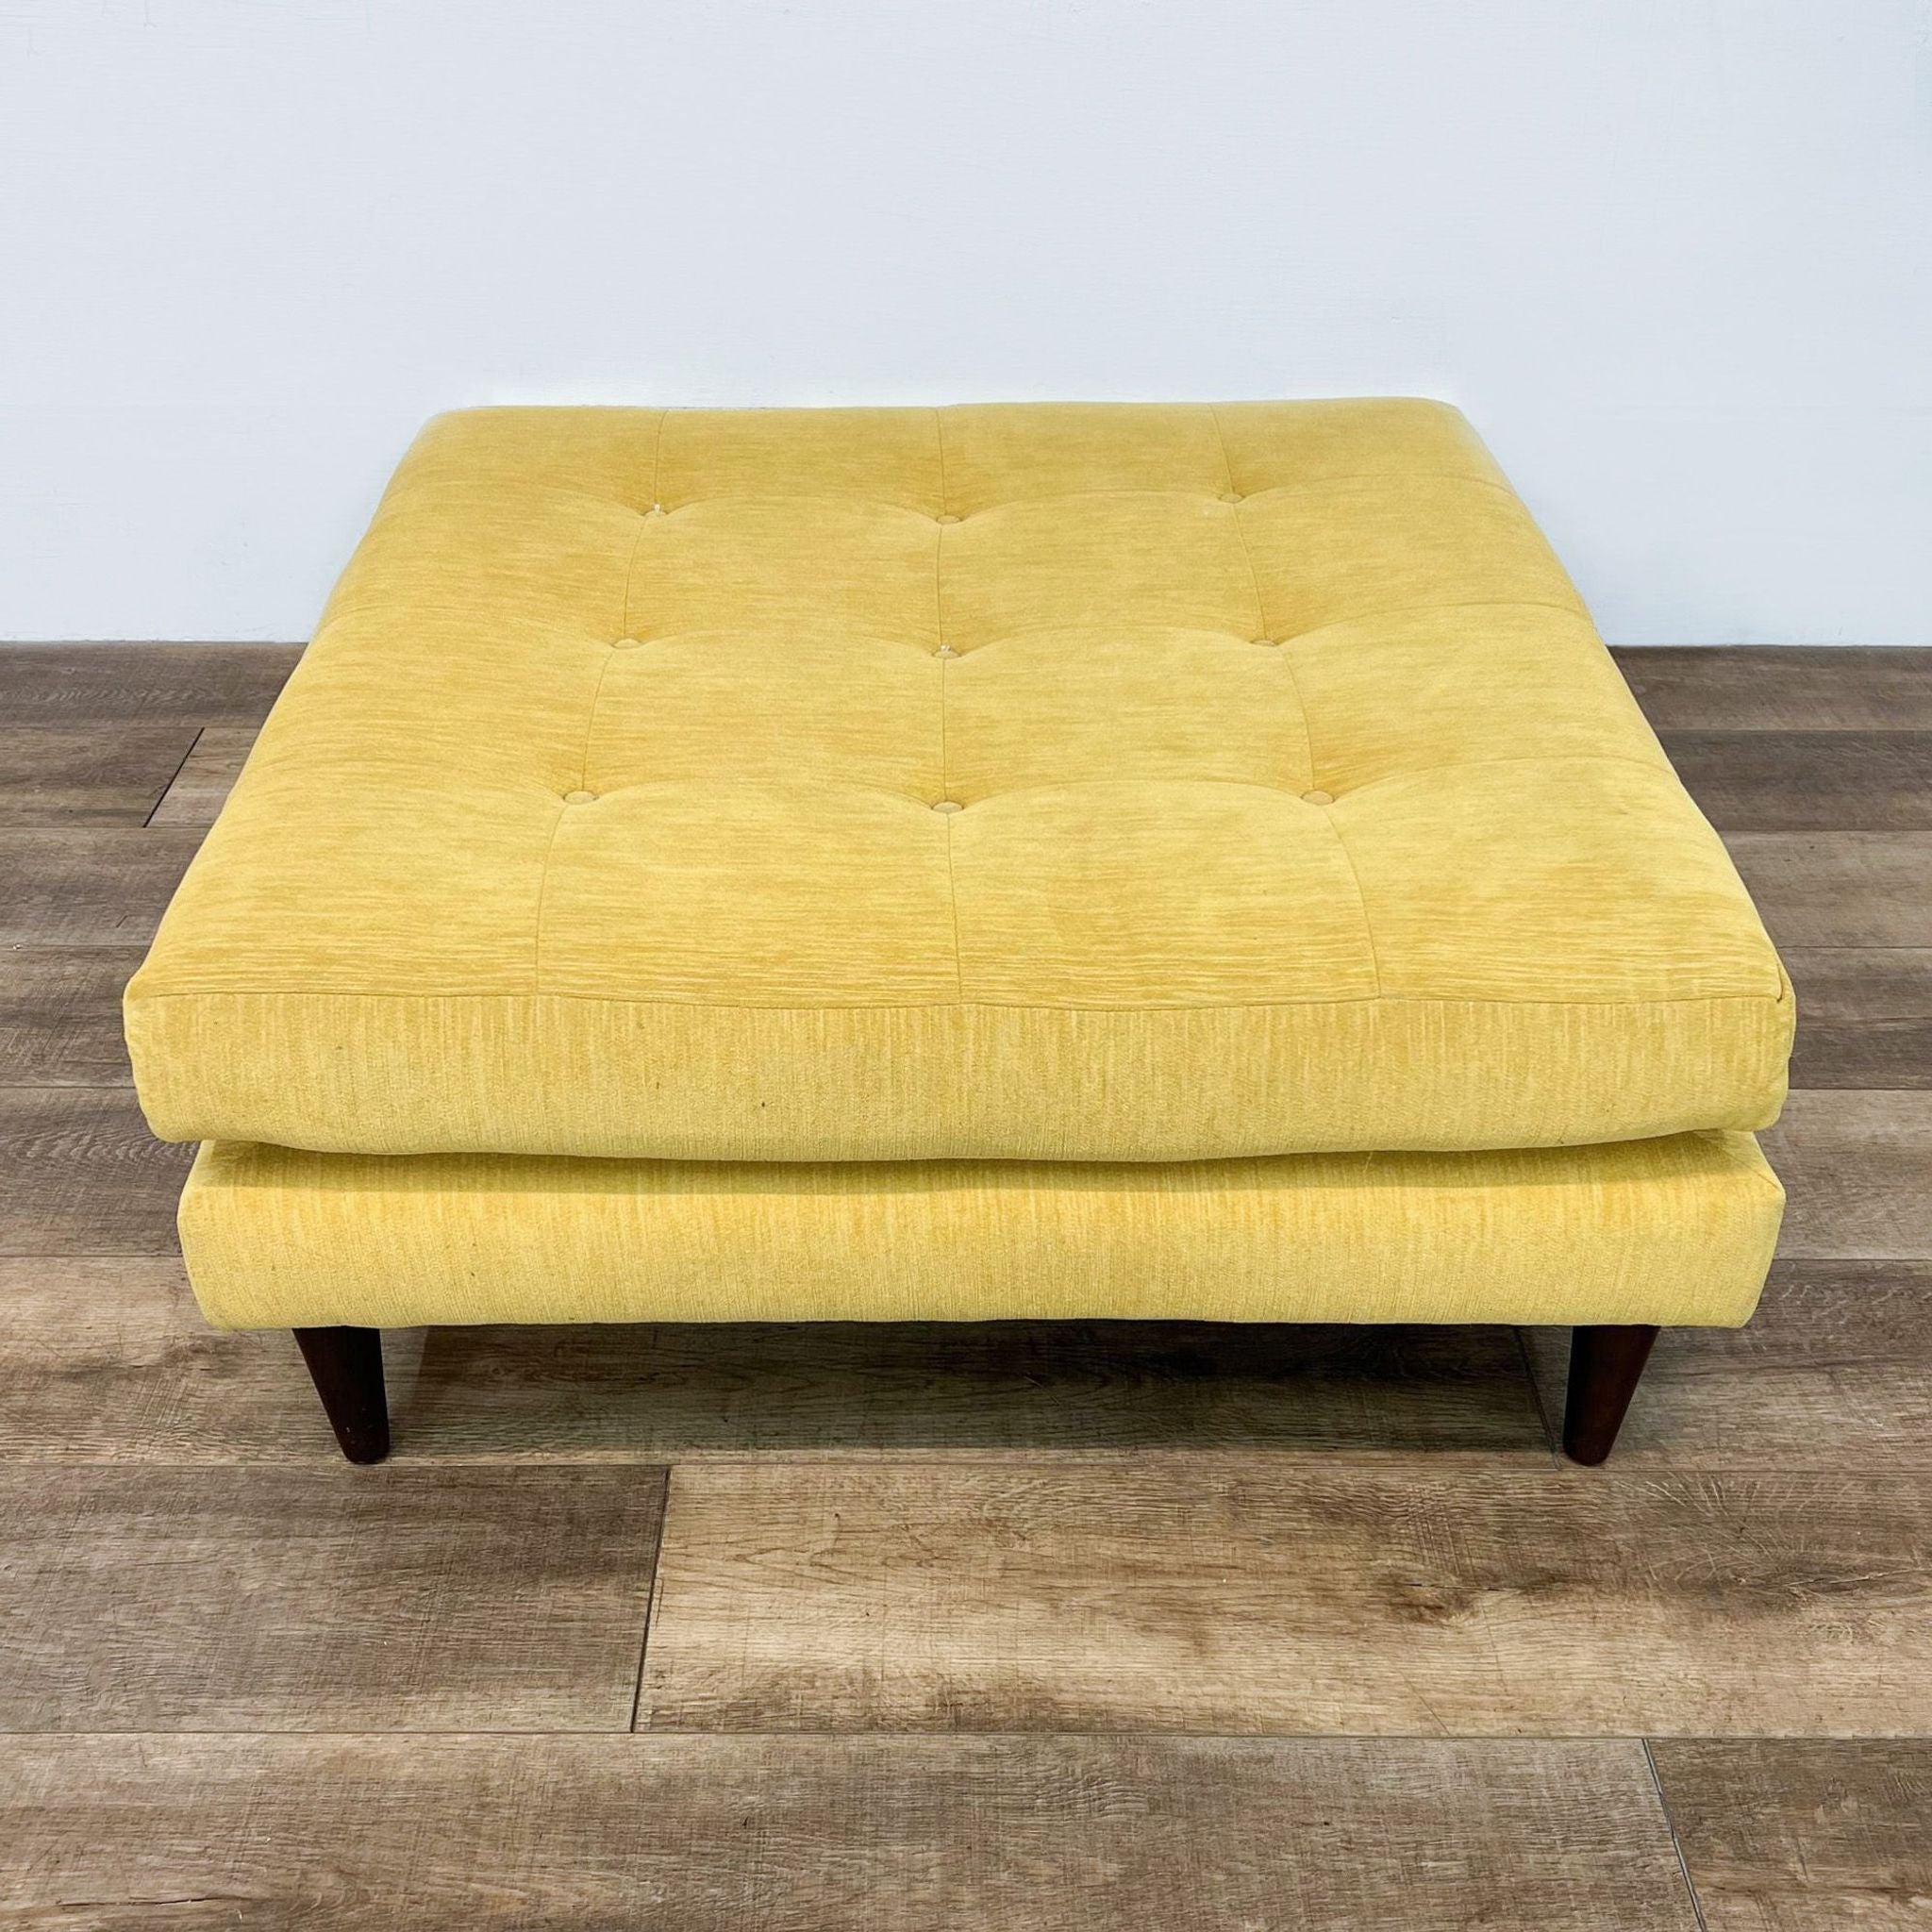 Square fabric tufted Joybird ottoman in yellow with wooden tapered legs, viewed from angle.